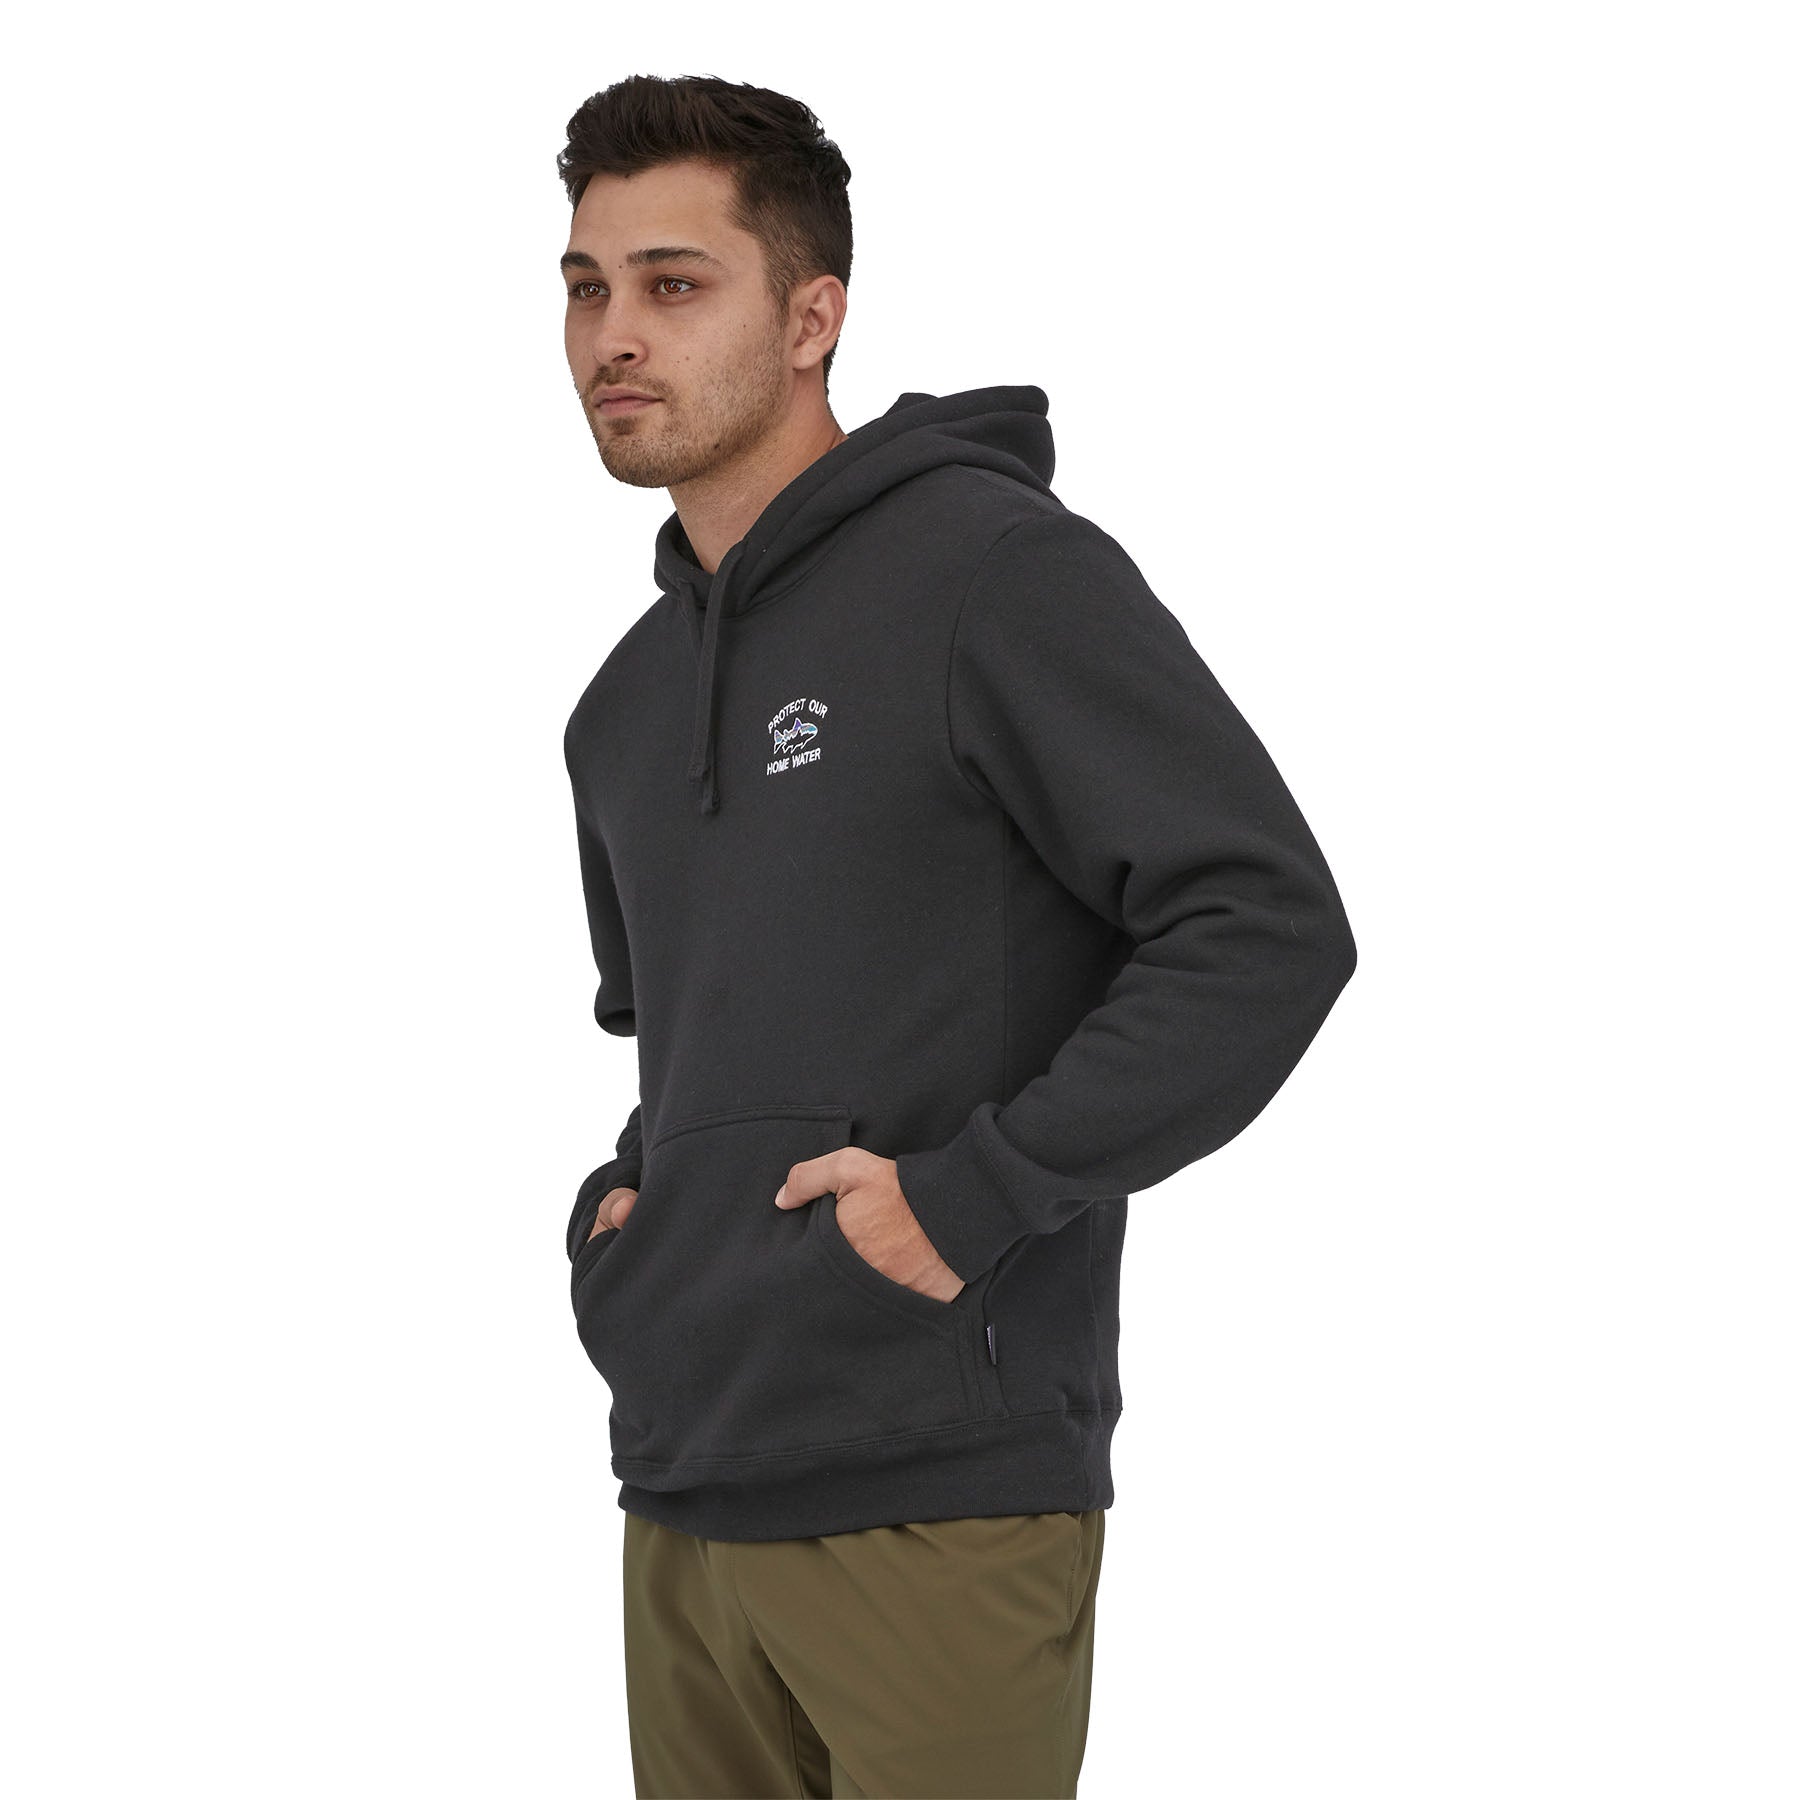 Home Water Trout Uprisal Hoody